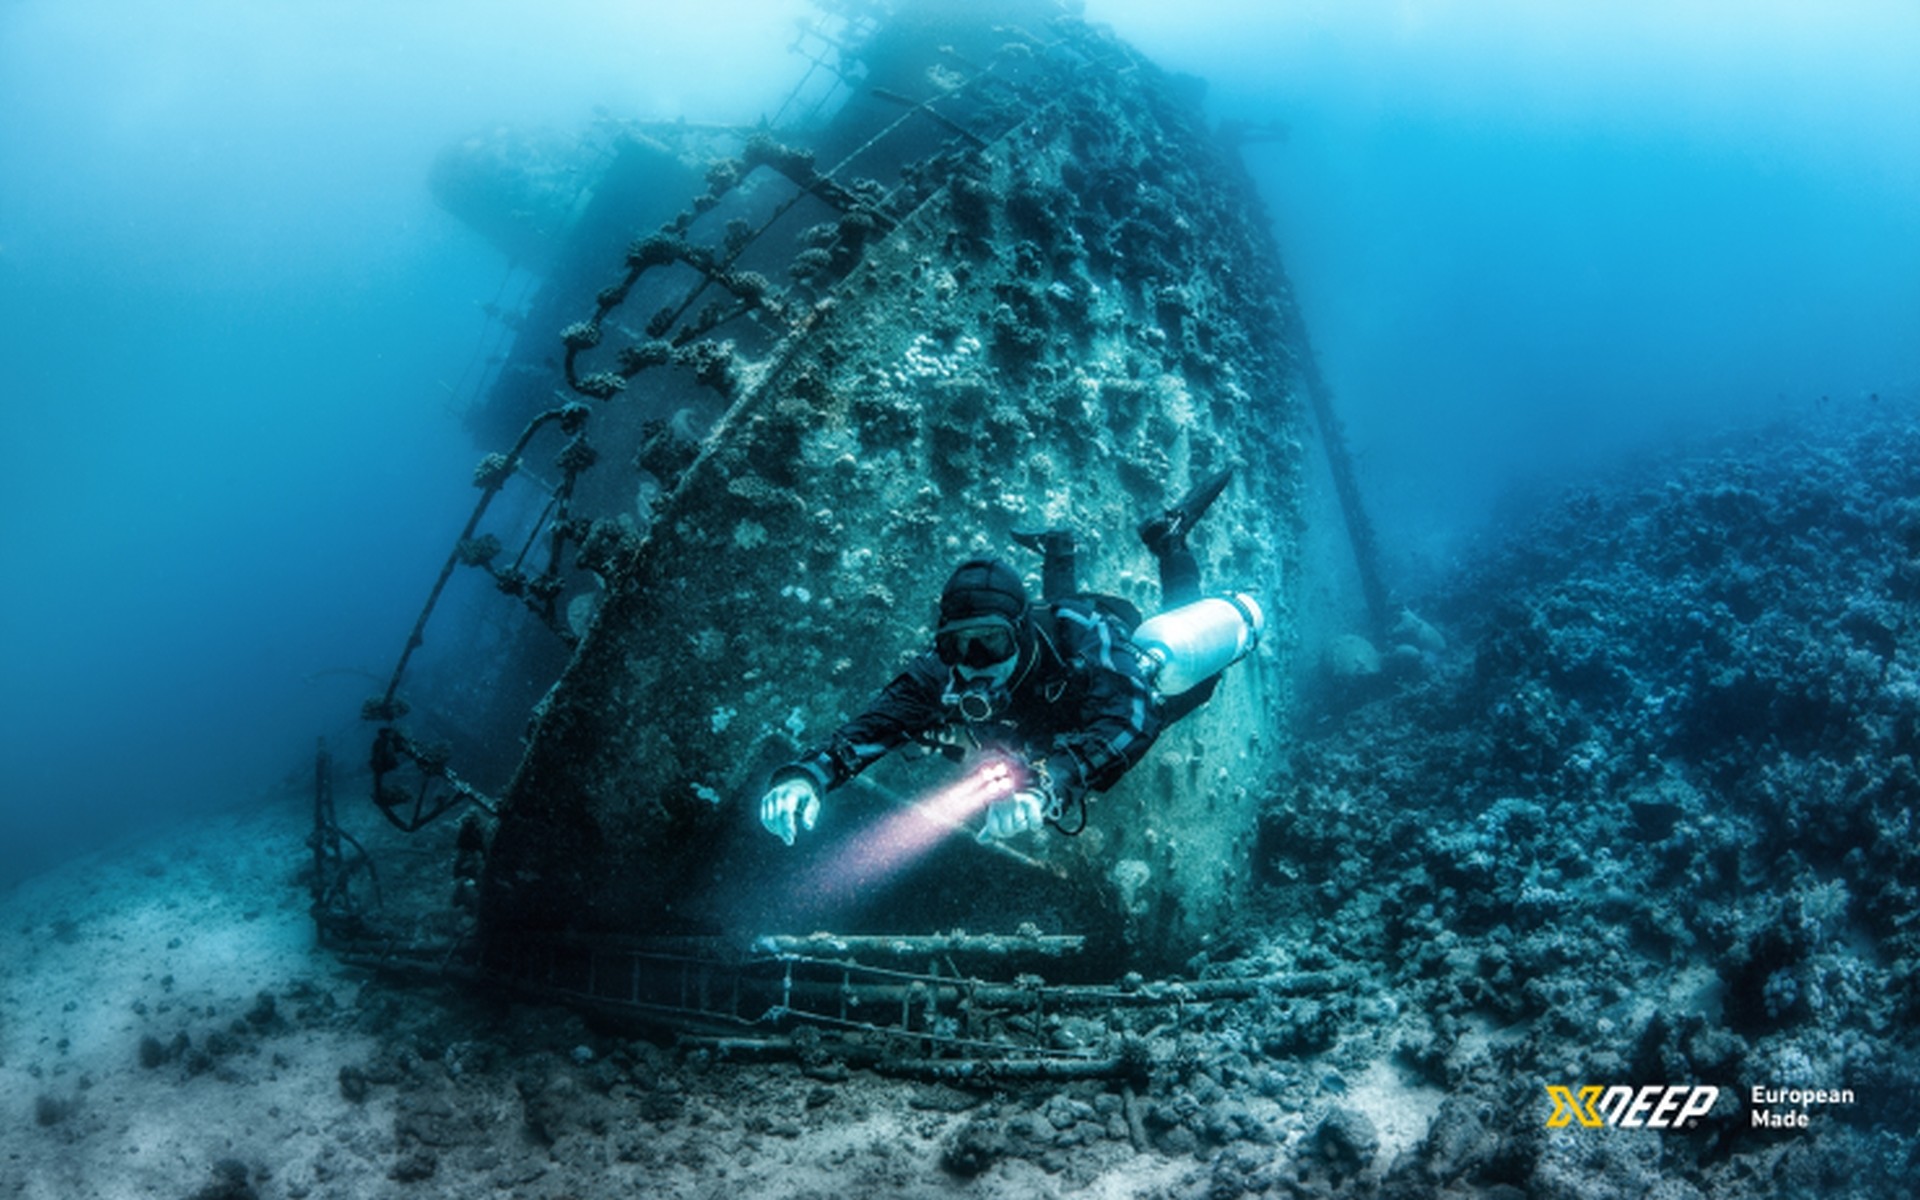 1920x1200 Scuba Wallpaper – Sidemount diver with STEALTH 2.0 REC Setup diving on  Giannis D wreck, Red Sea, Egypt – XDEEP